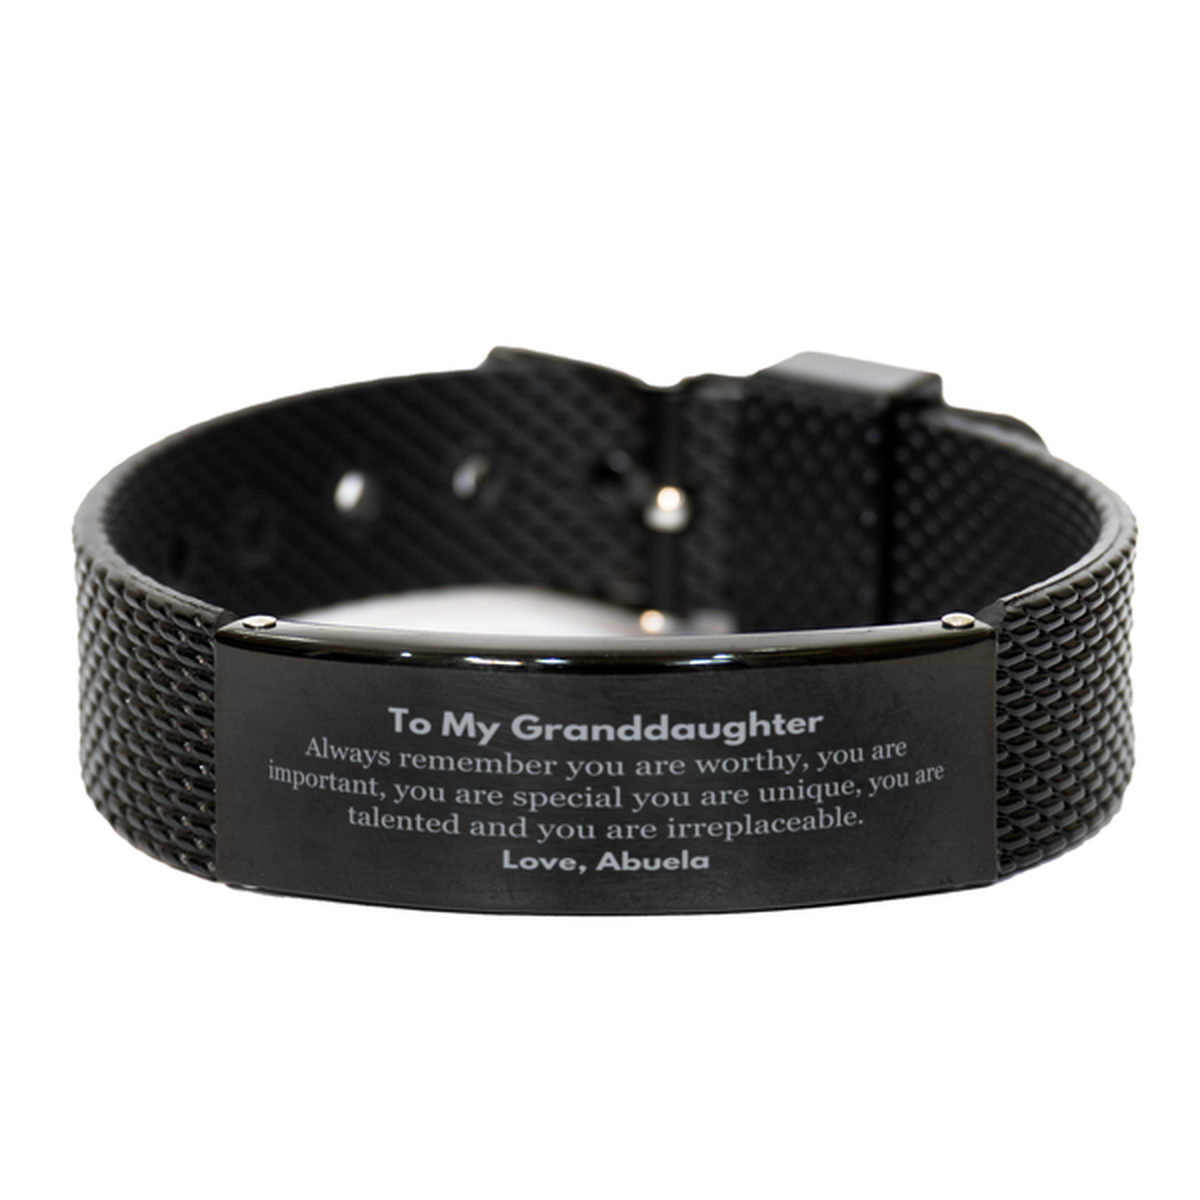 Granddaughter Birthday Gifts from Abuela, Inspirational Black Shark Mesh Bracelet for Granddaughter Christmas Graduation Gifts for Granddaughter Always remember you are worthy, you are important. Love, Abuela